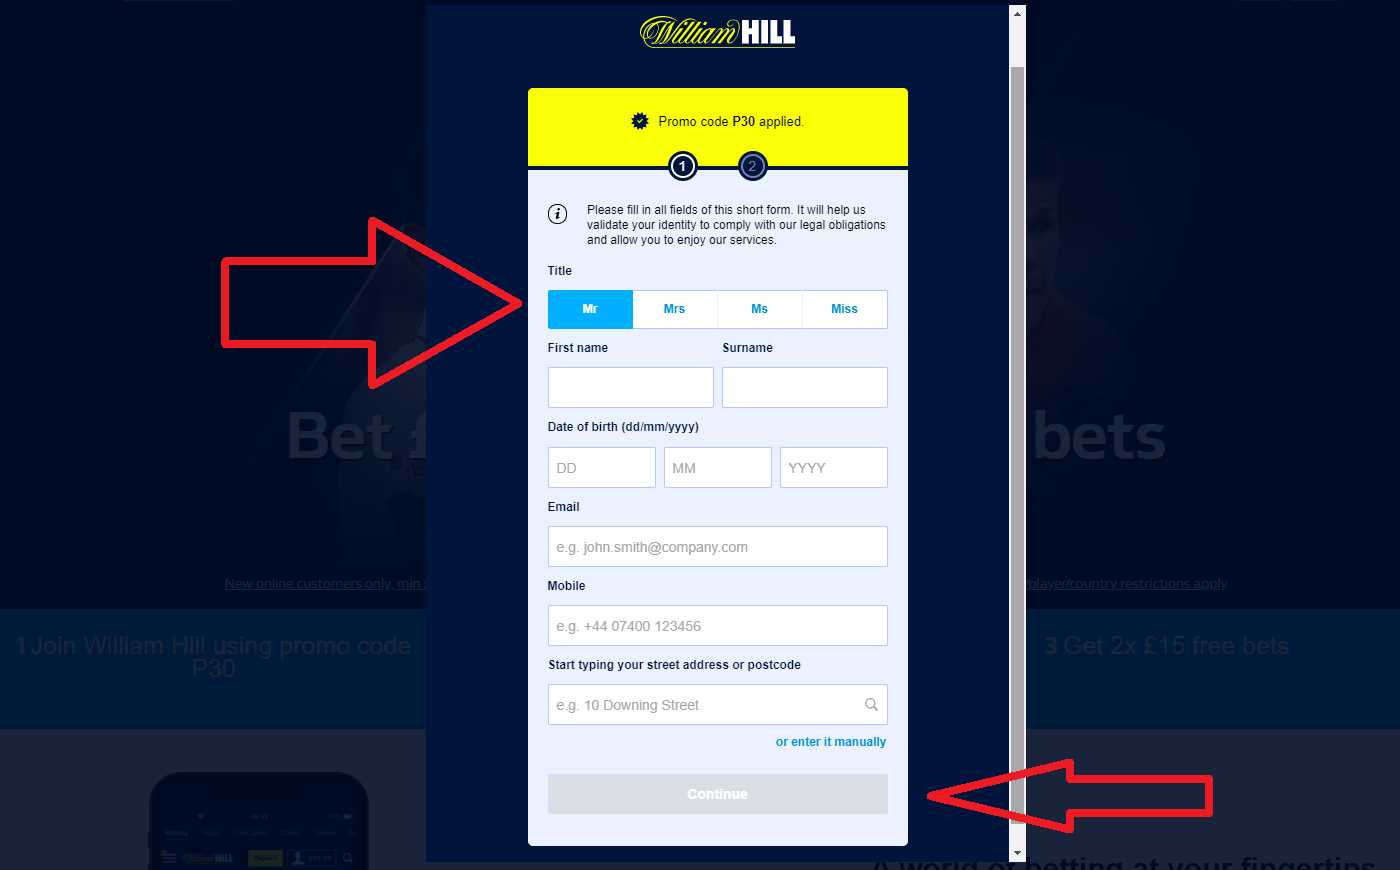 registration at the company William Hill